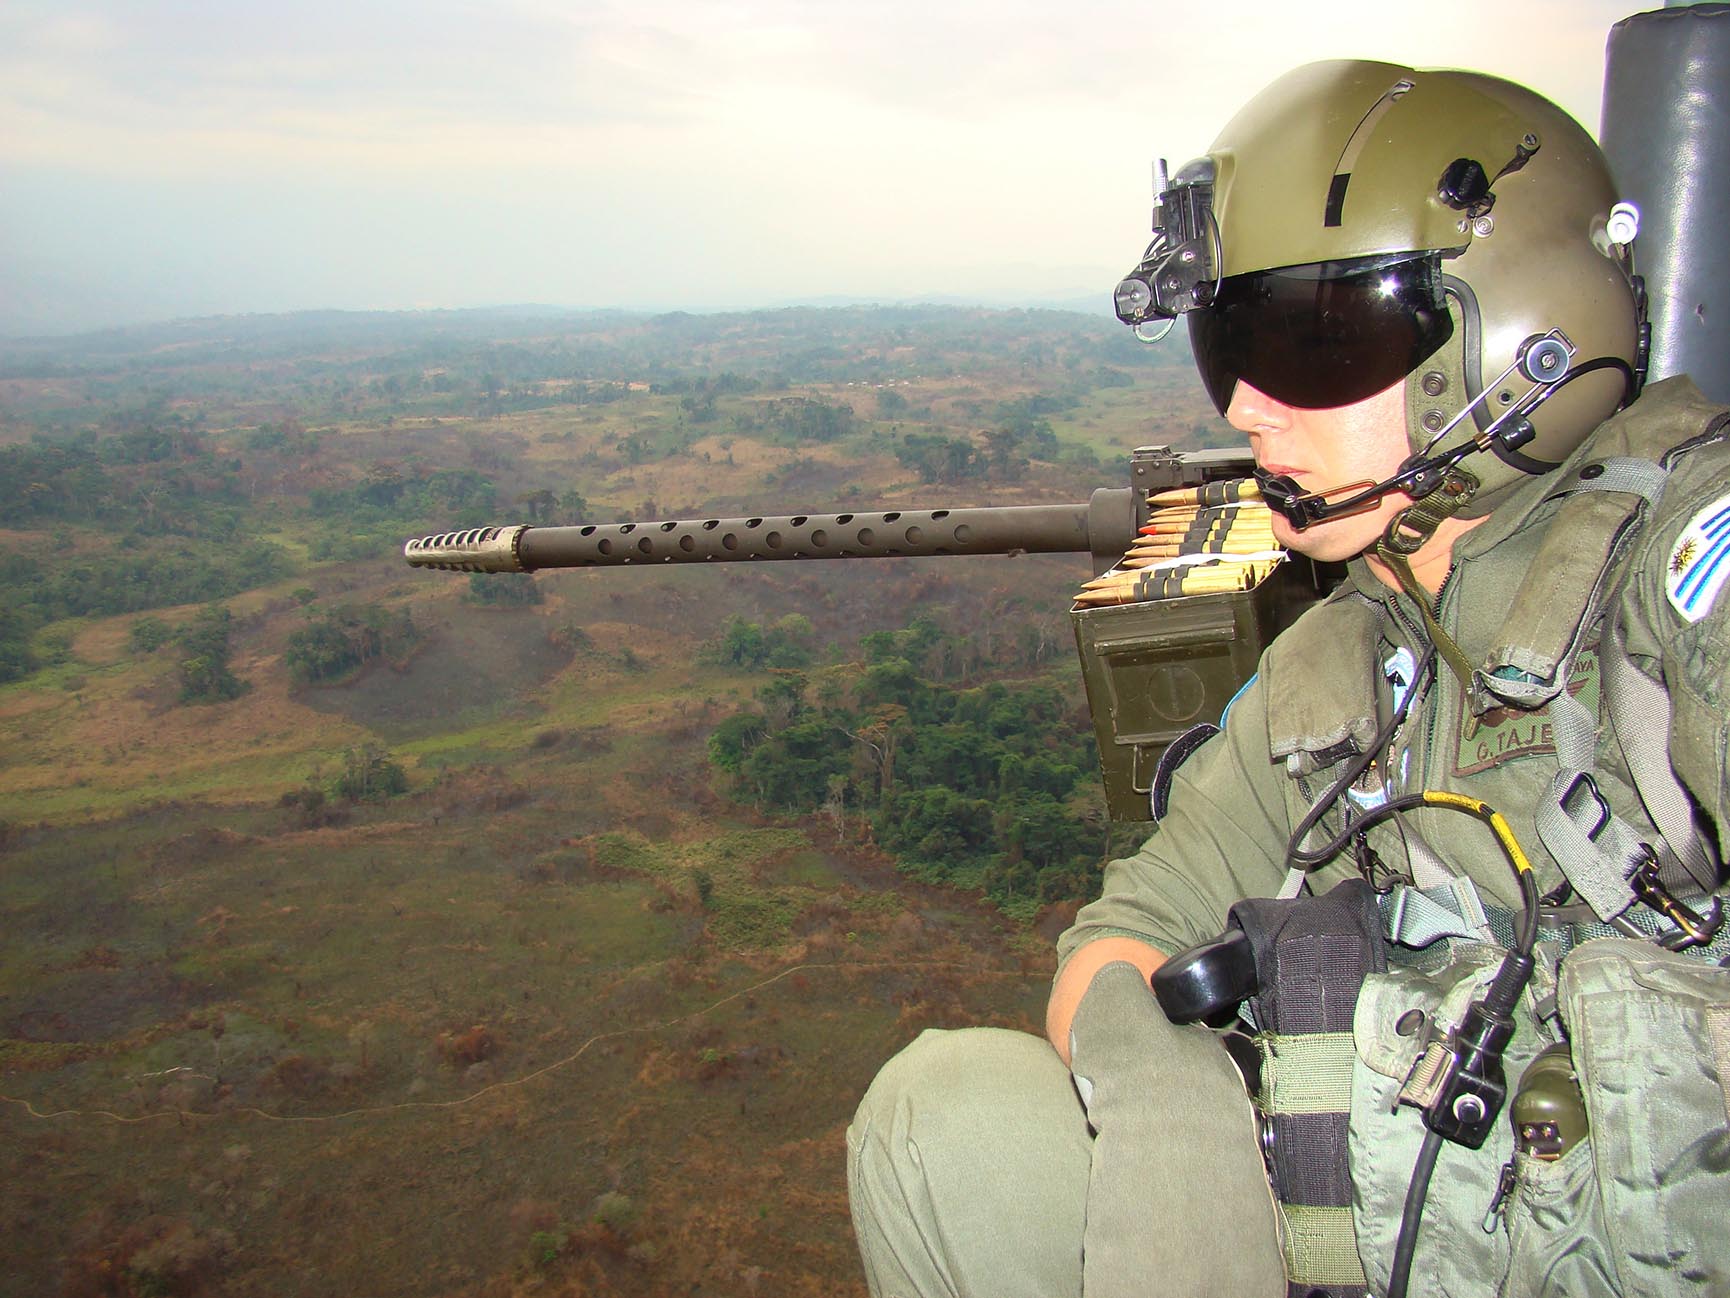 Lieutenant Colonel Tajes observes the countryside from the the open door of his helicopter in flight